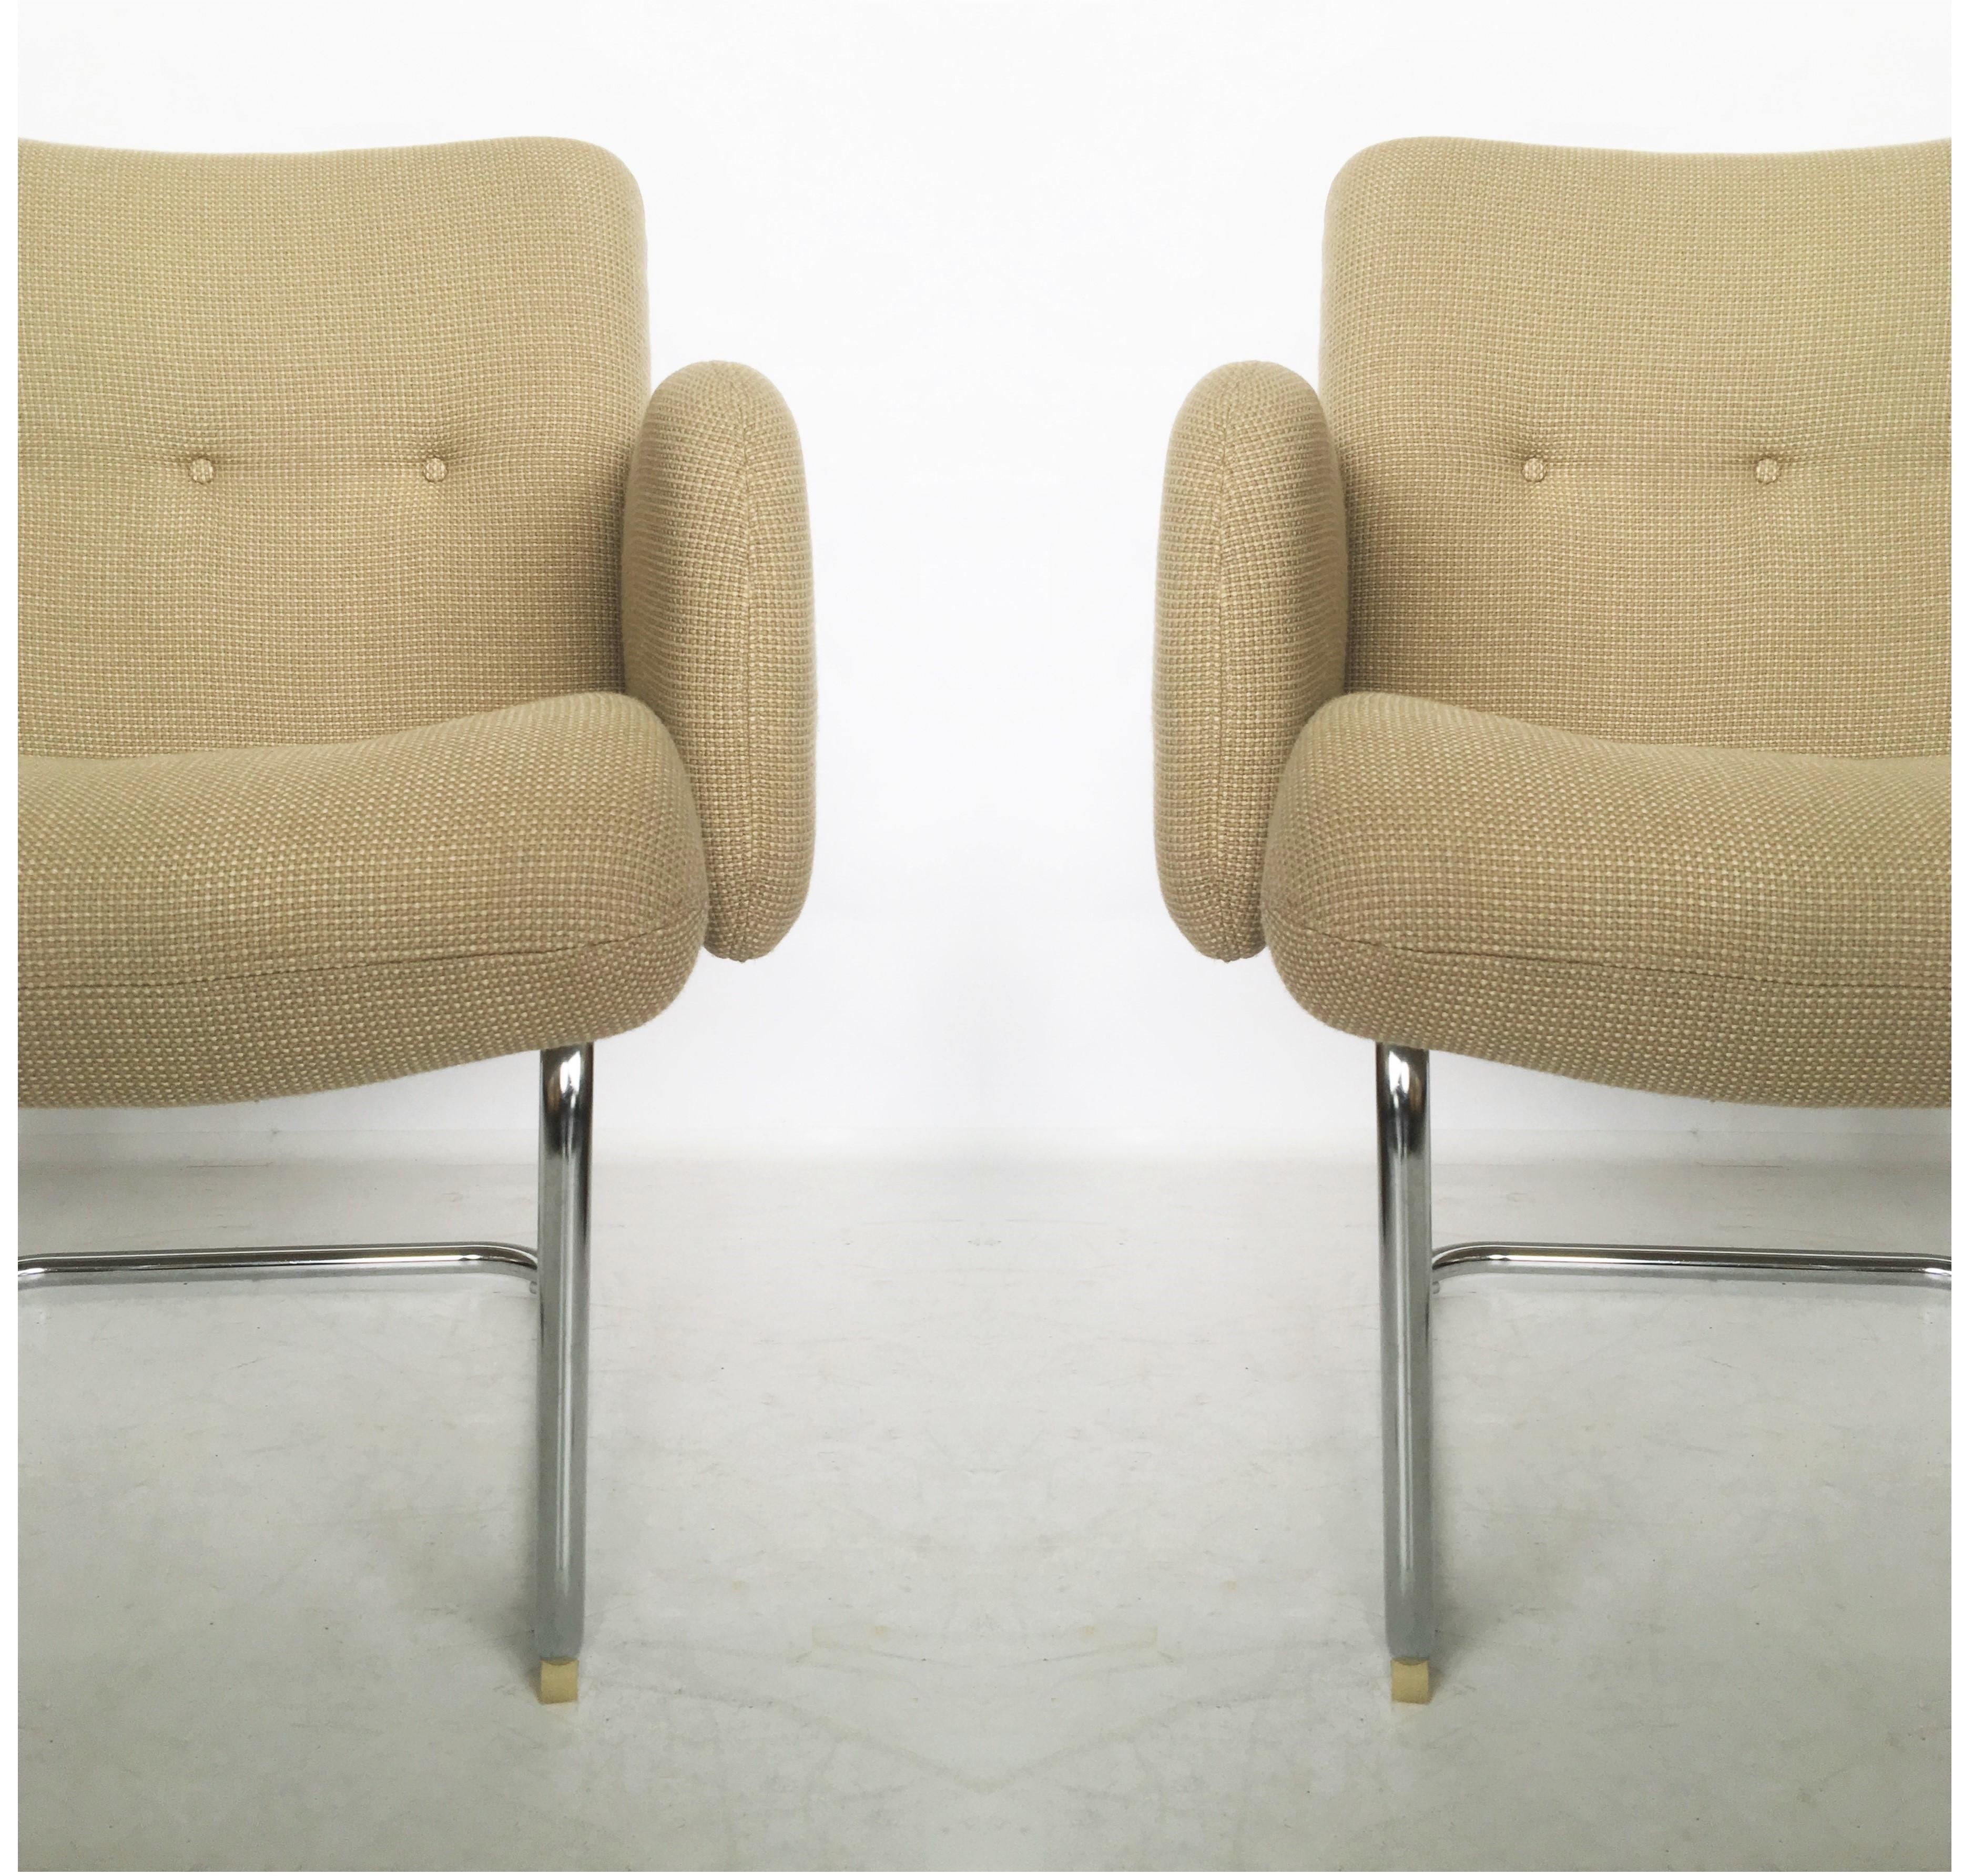 Pair of Mid-Century Modern Harvey Probber Cantilevered Chairs For Sale 1